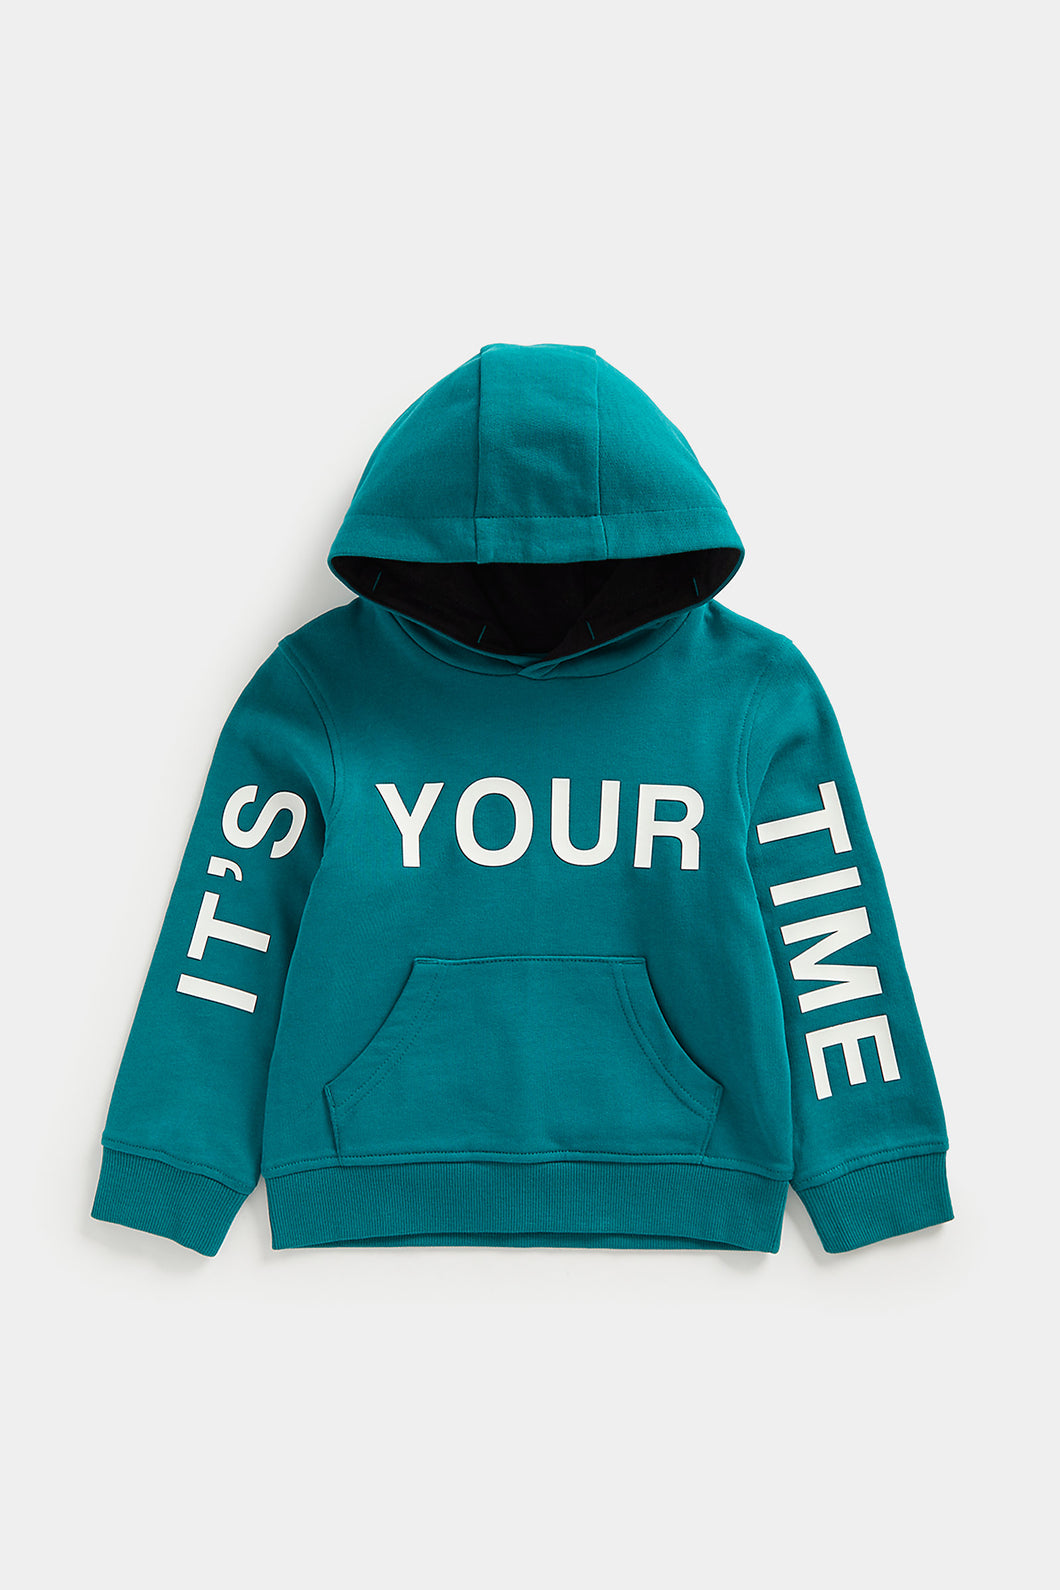 Mothercare Teal Your Time Hoody